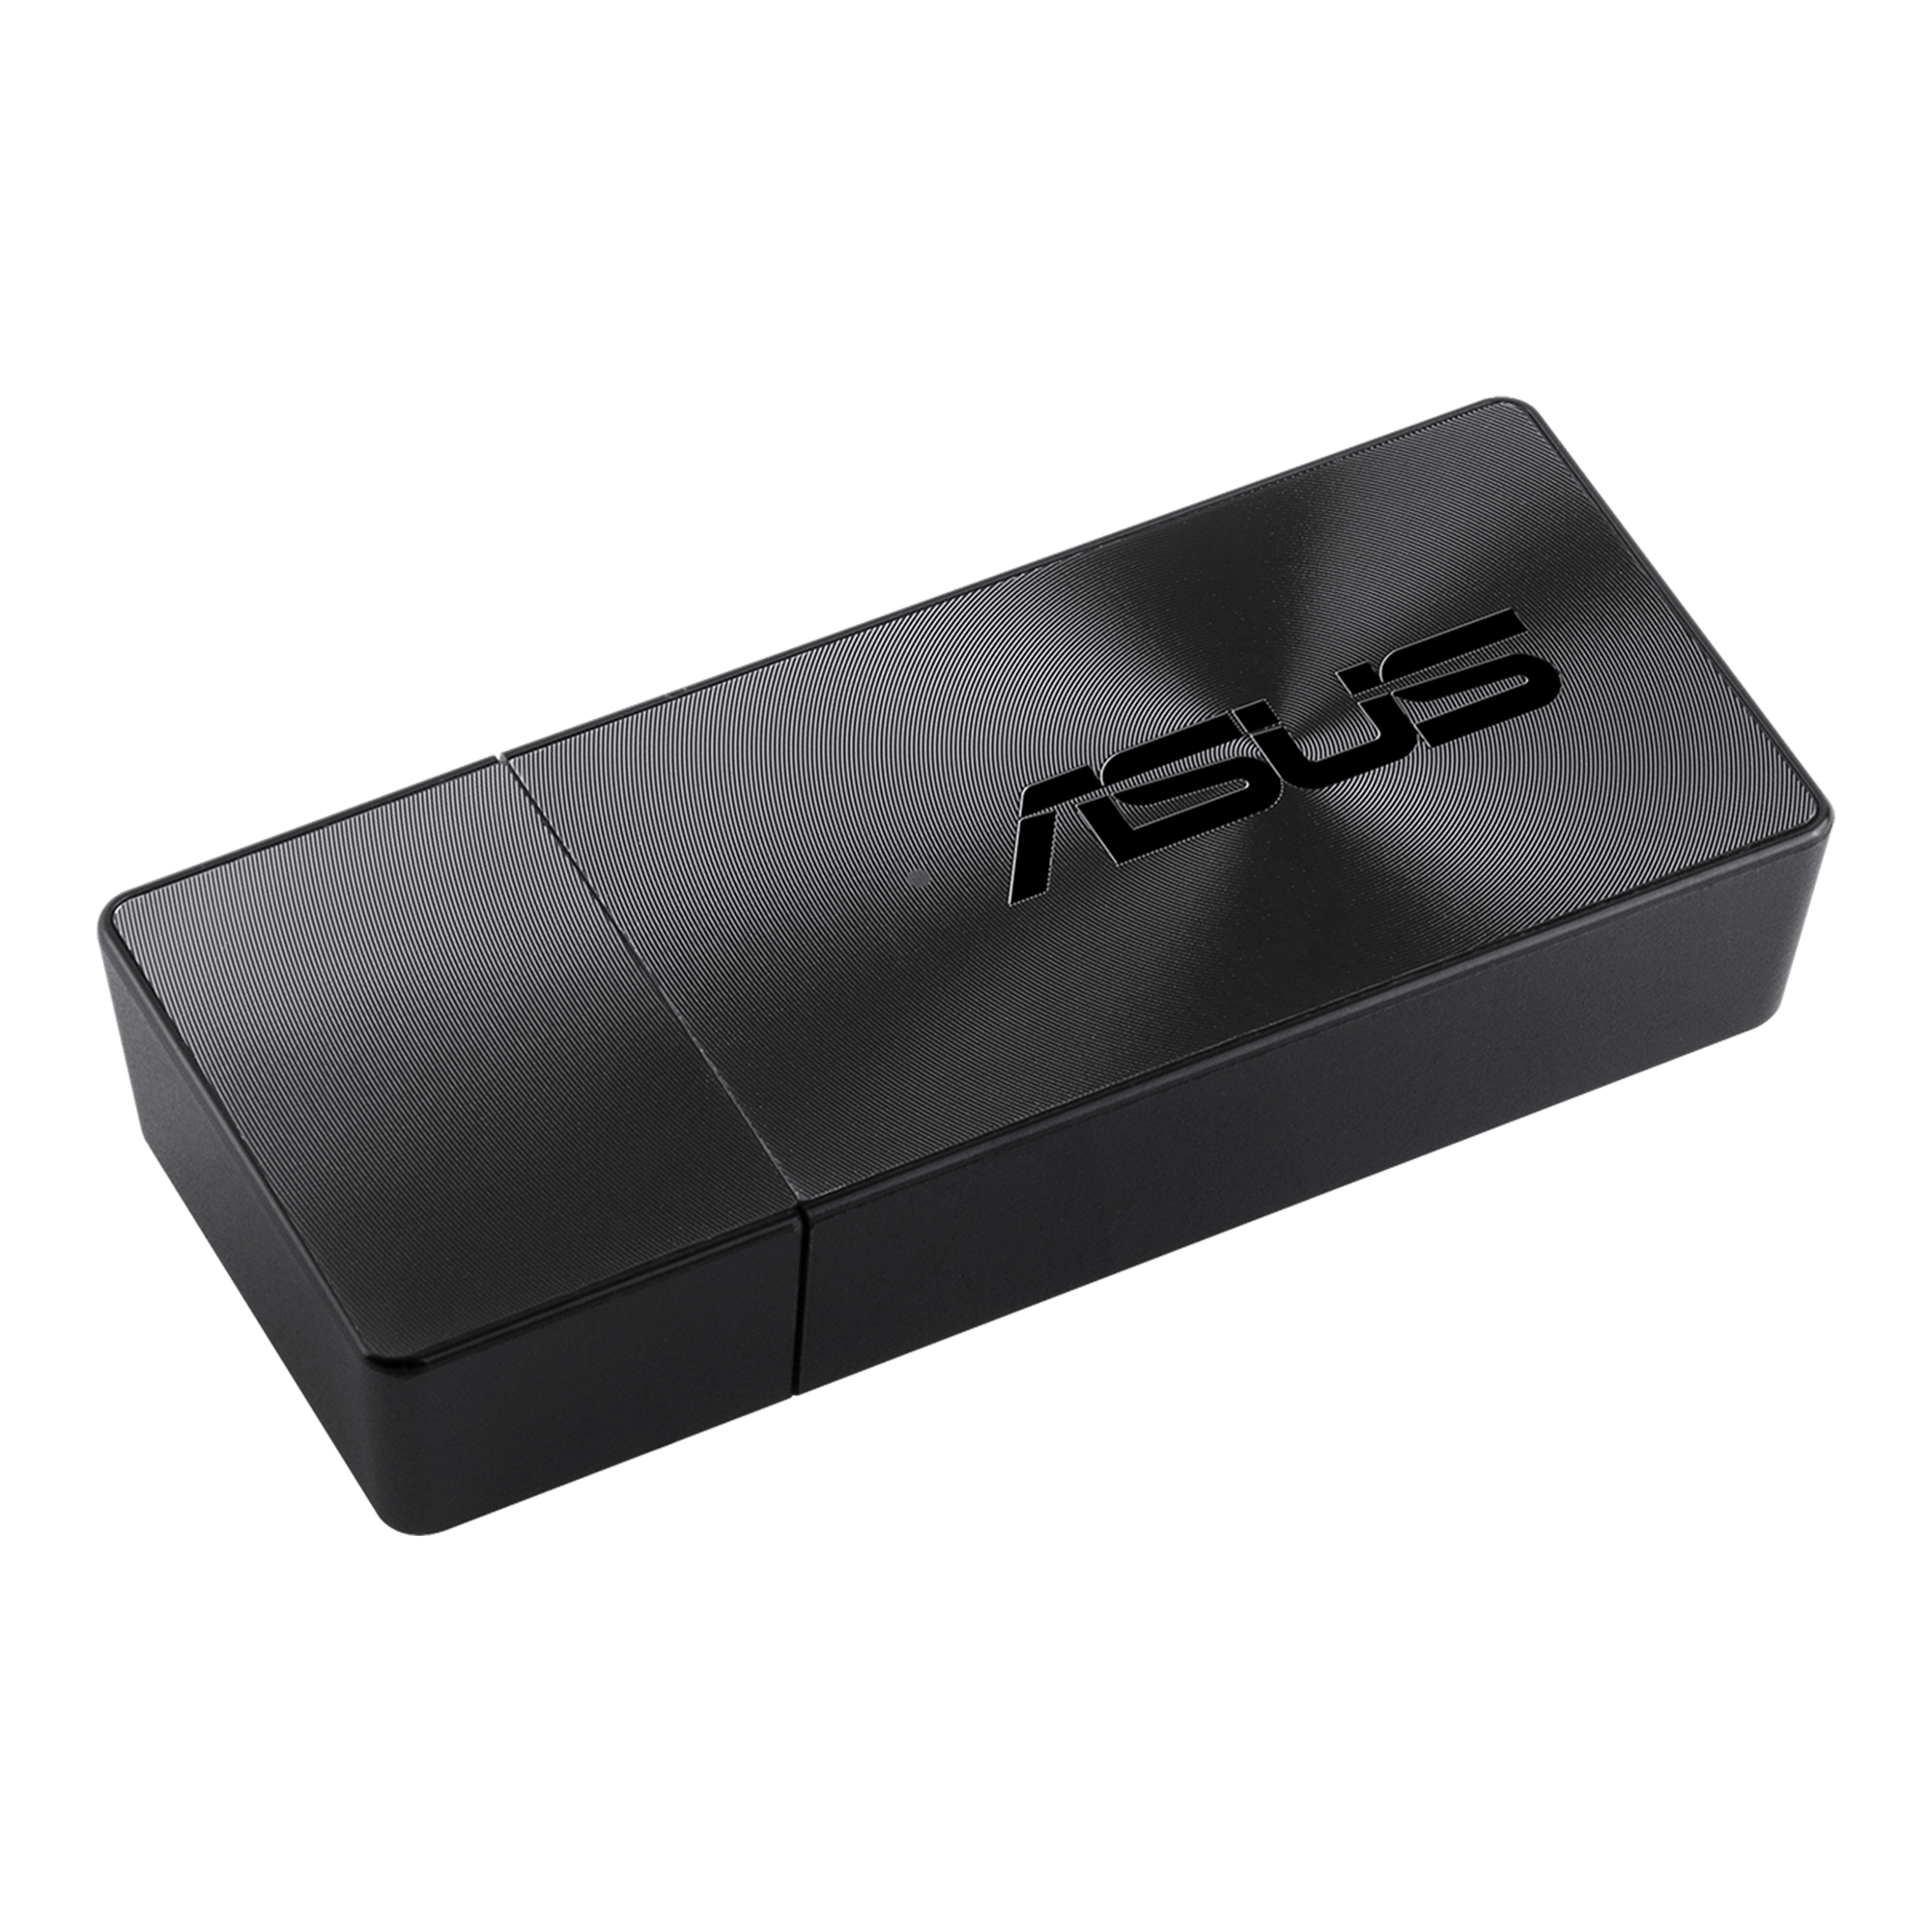 ASUS USB-AC55 B1 EndeavourOS Driver Installation - Featured